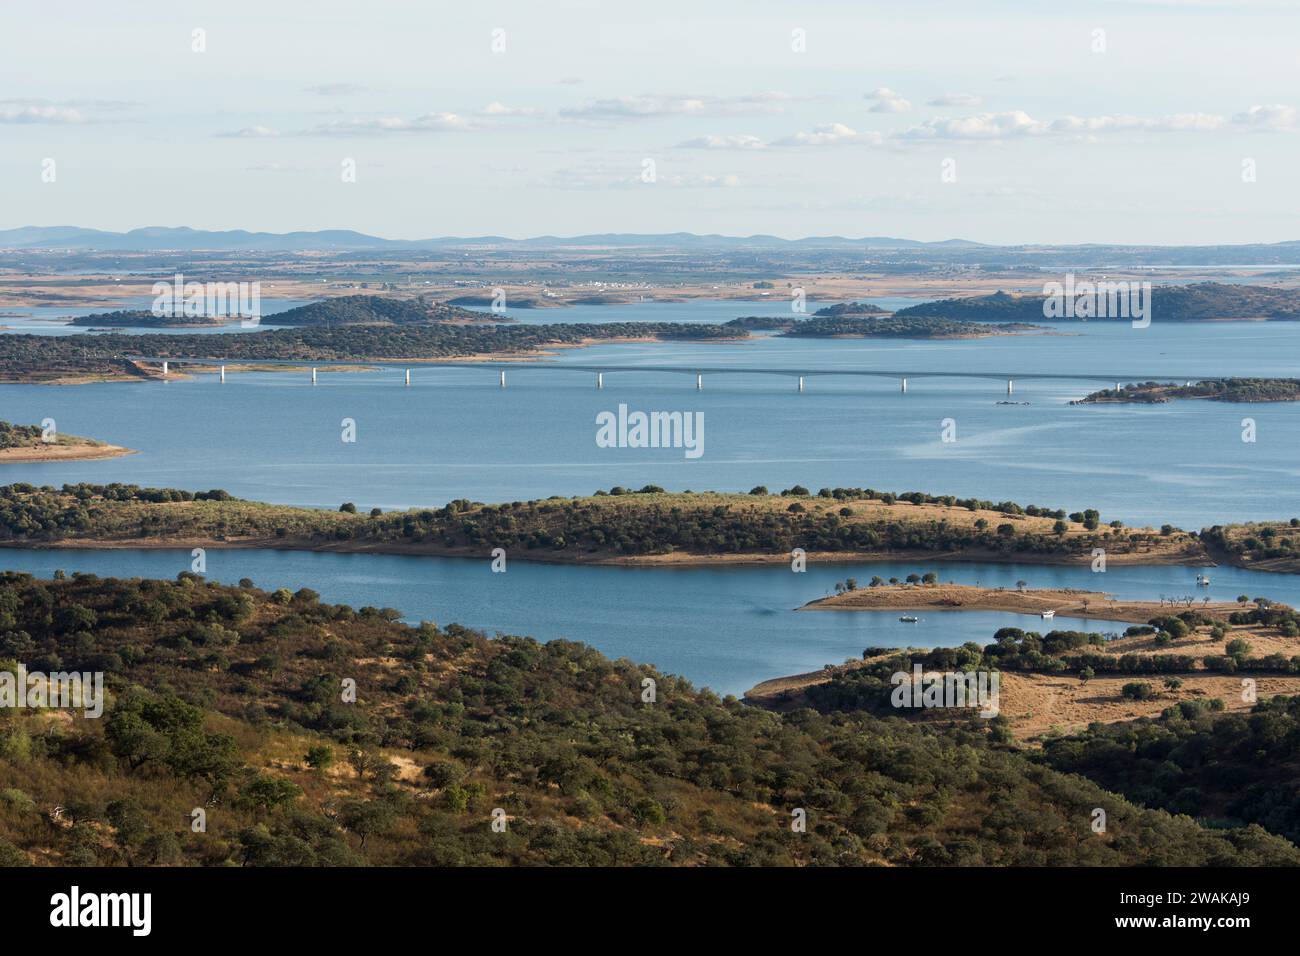 The Alqueva Dam, the largest artificial lake in Western Europe, seen from the medieval village Monsaraz, Portugal. Stock Photo